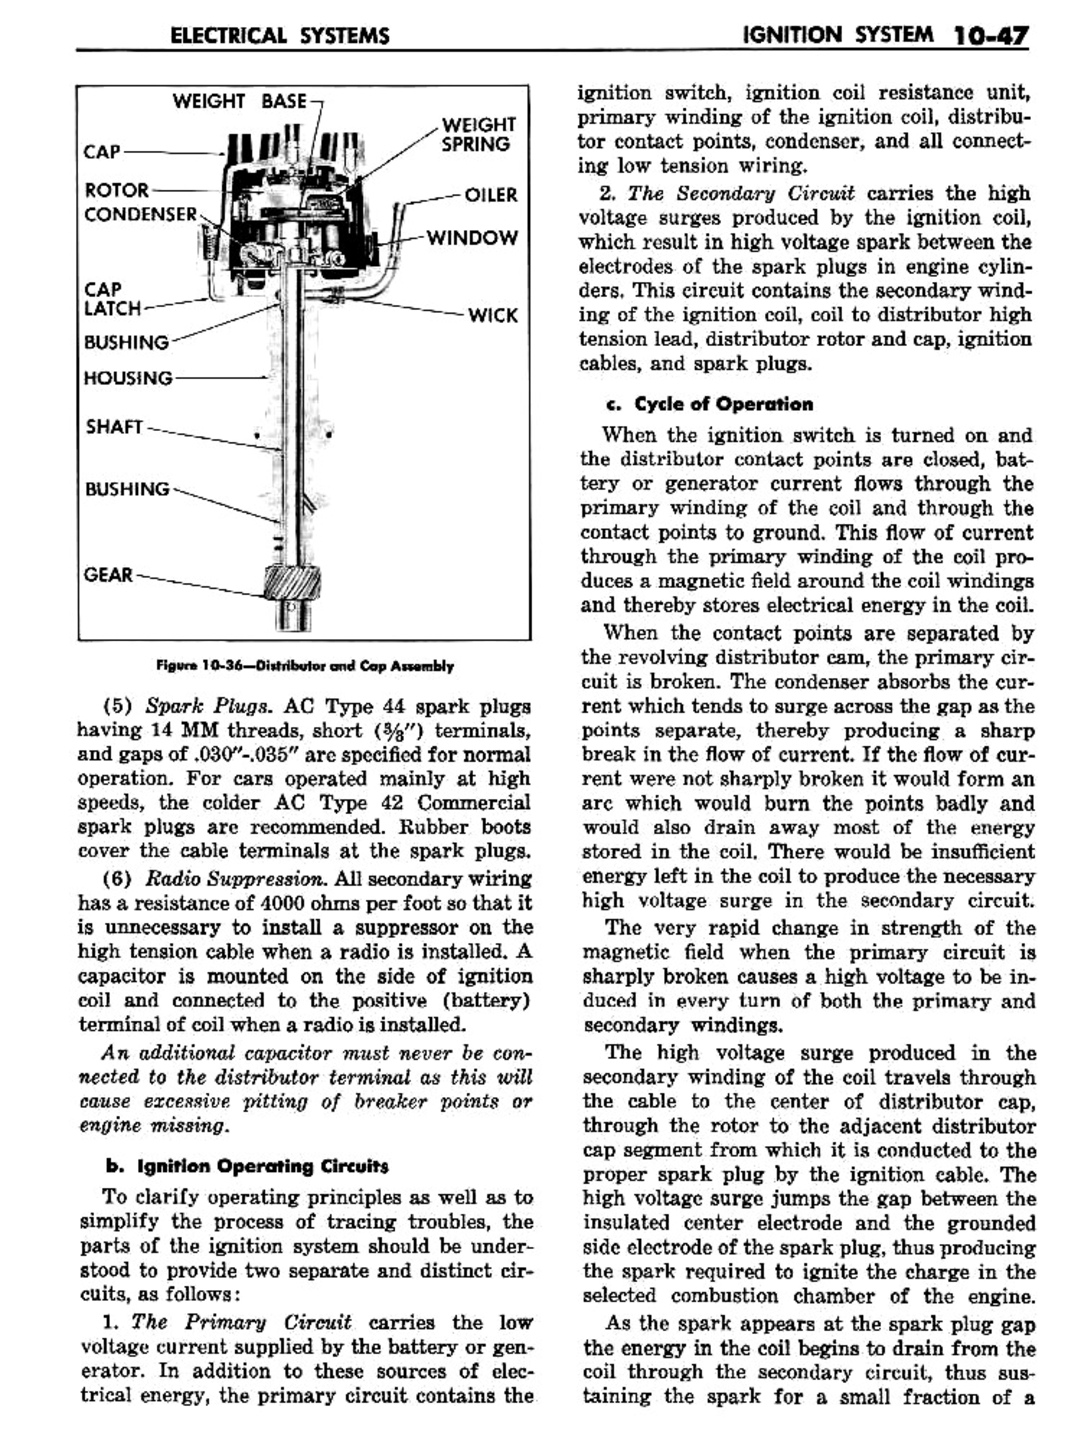 n_11 1957 Buick Shop Manual - Electrical Systems-047-047.jpg